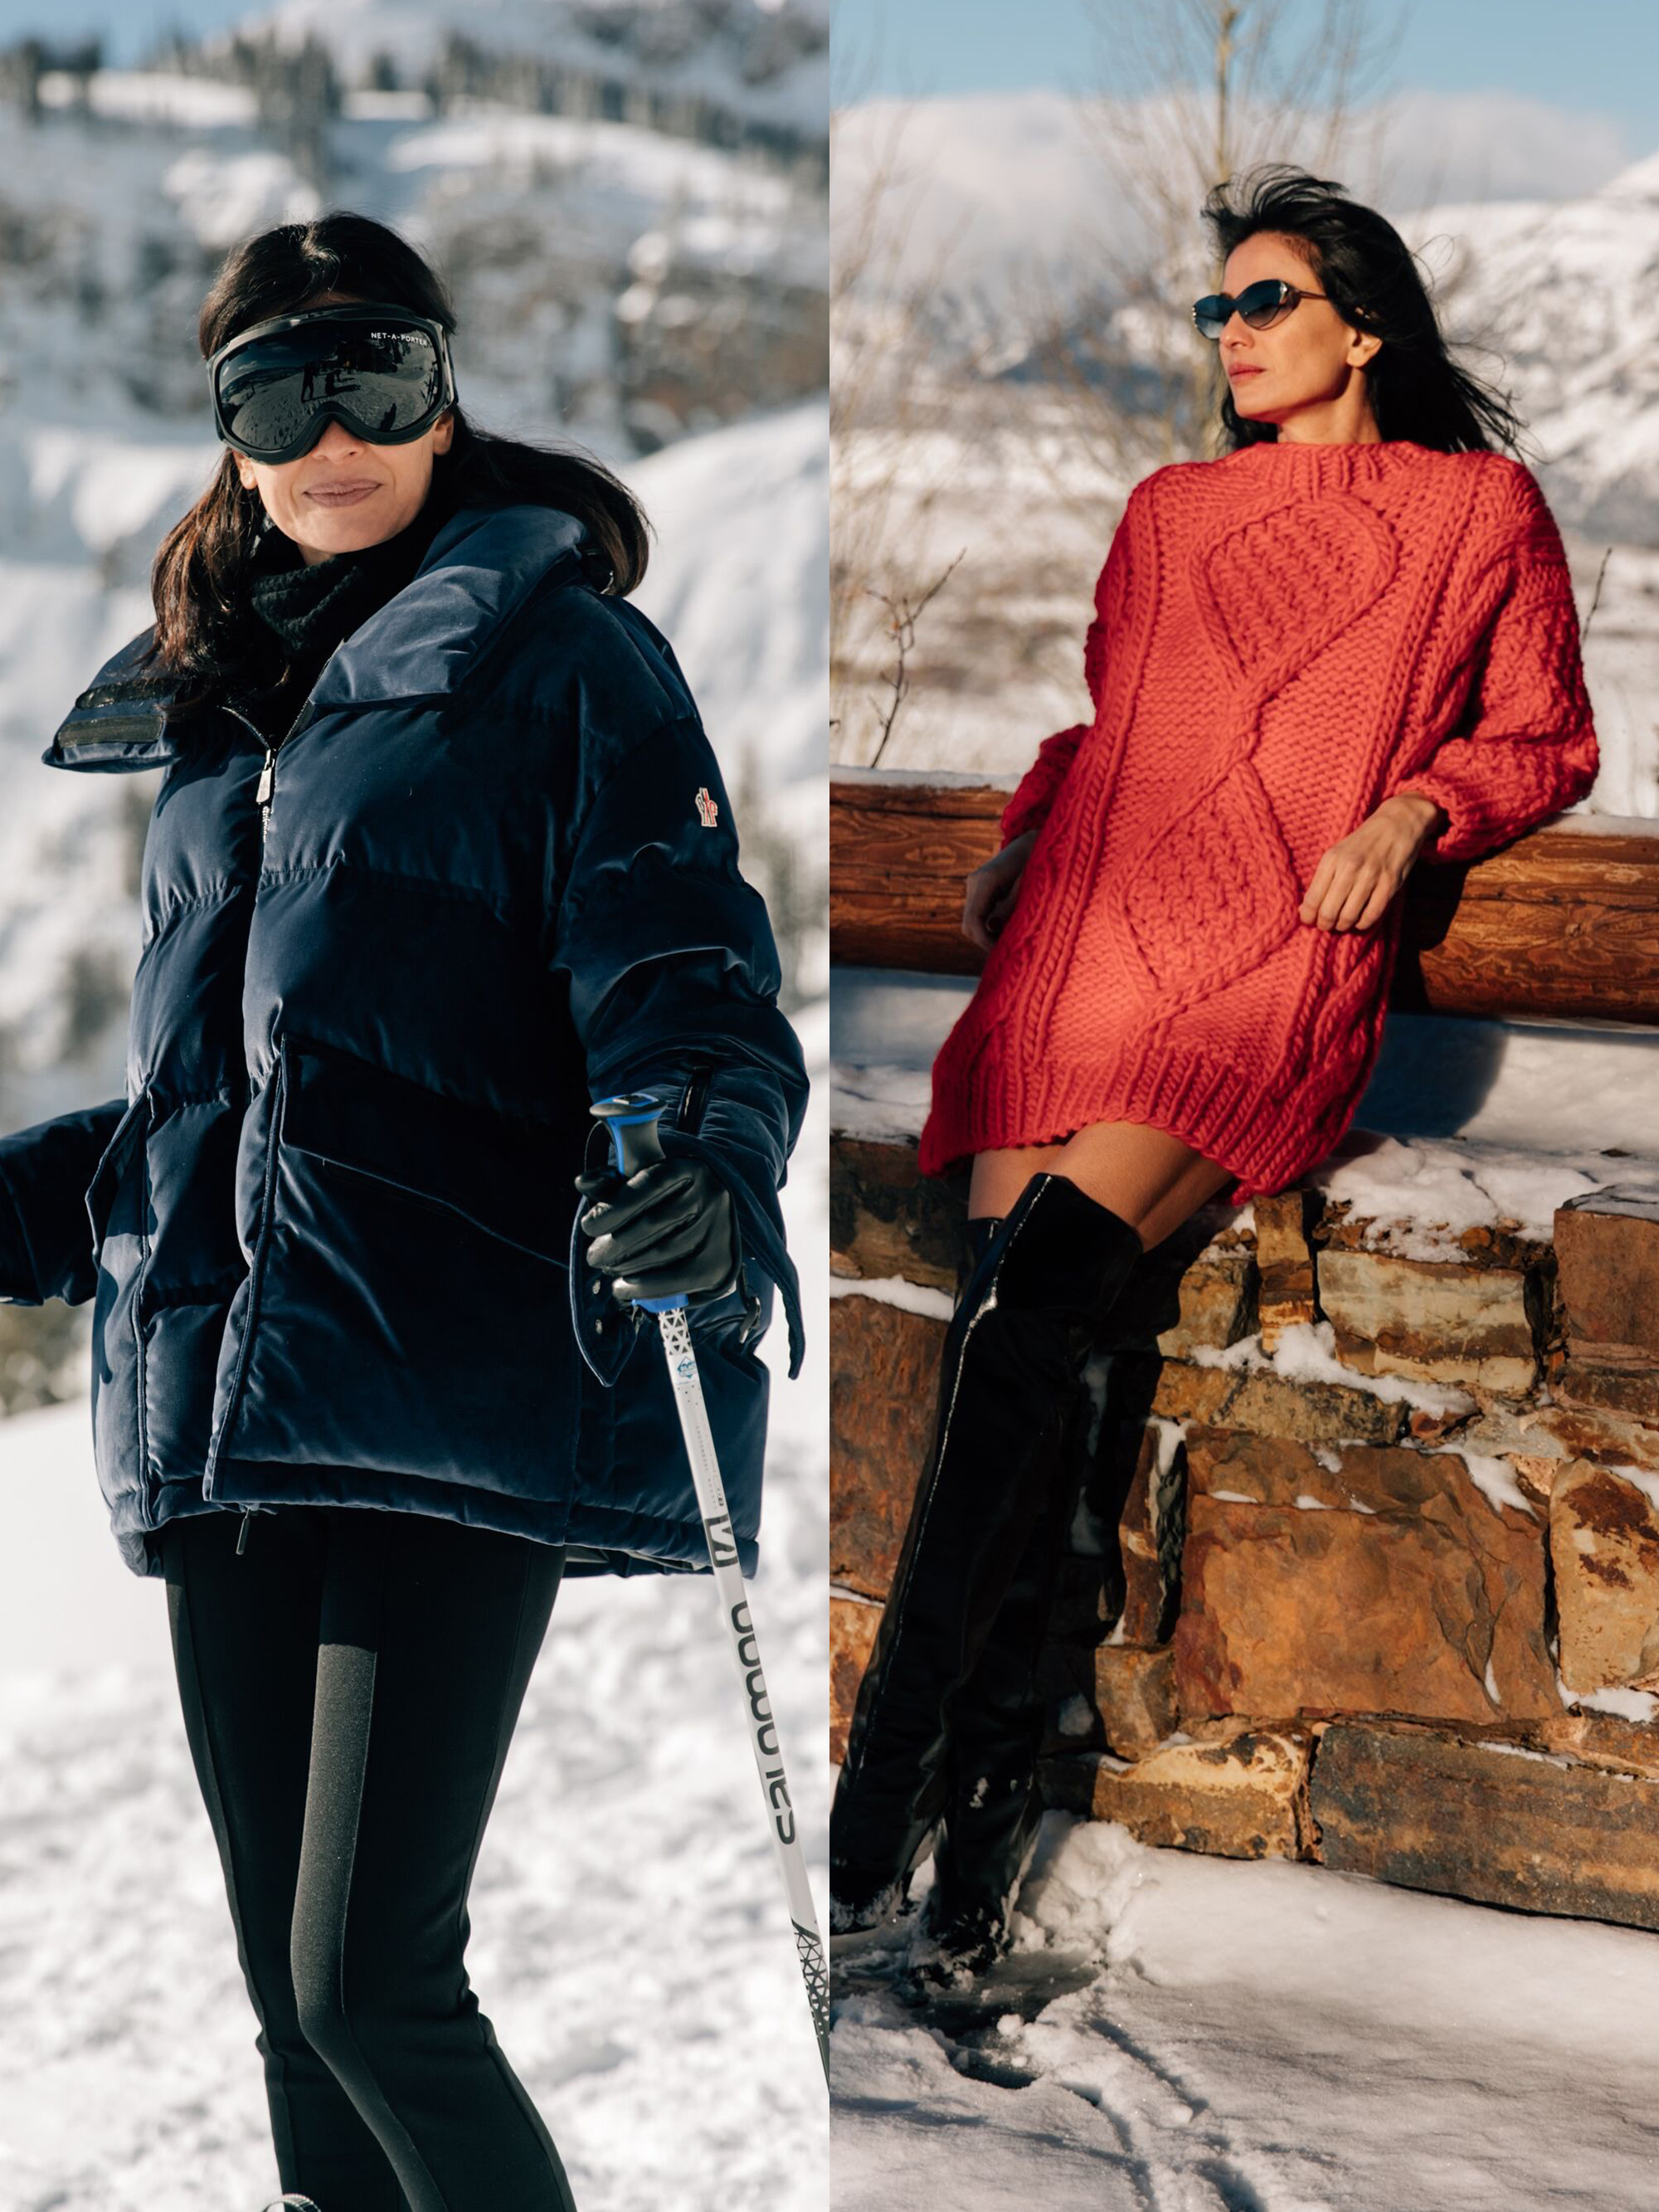 Why après-ski style is the perfect look for January 2022 – even if